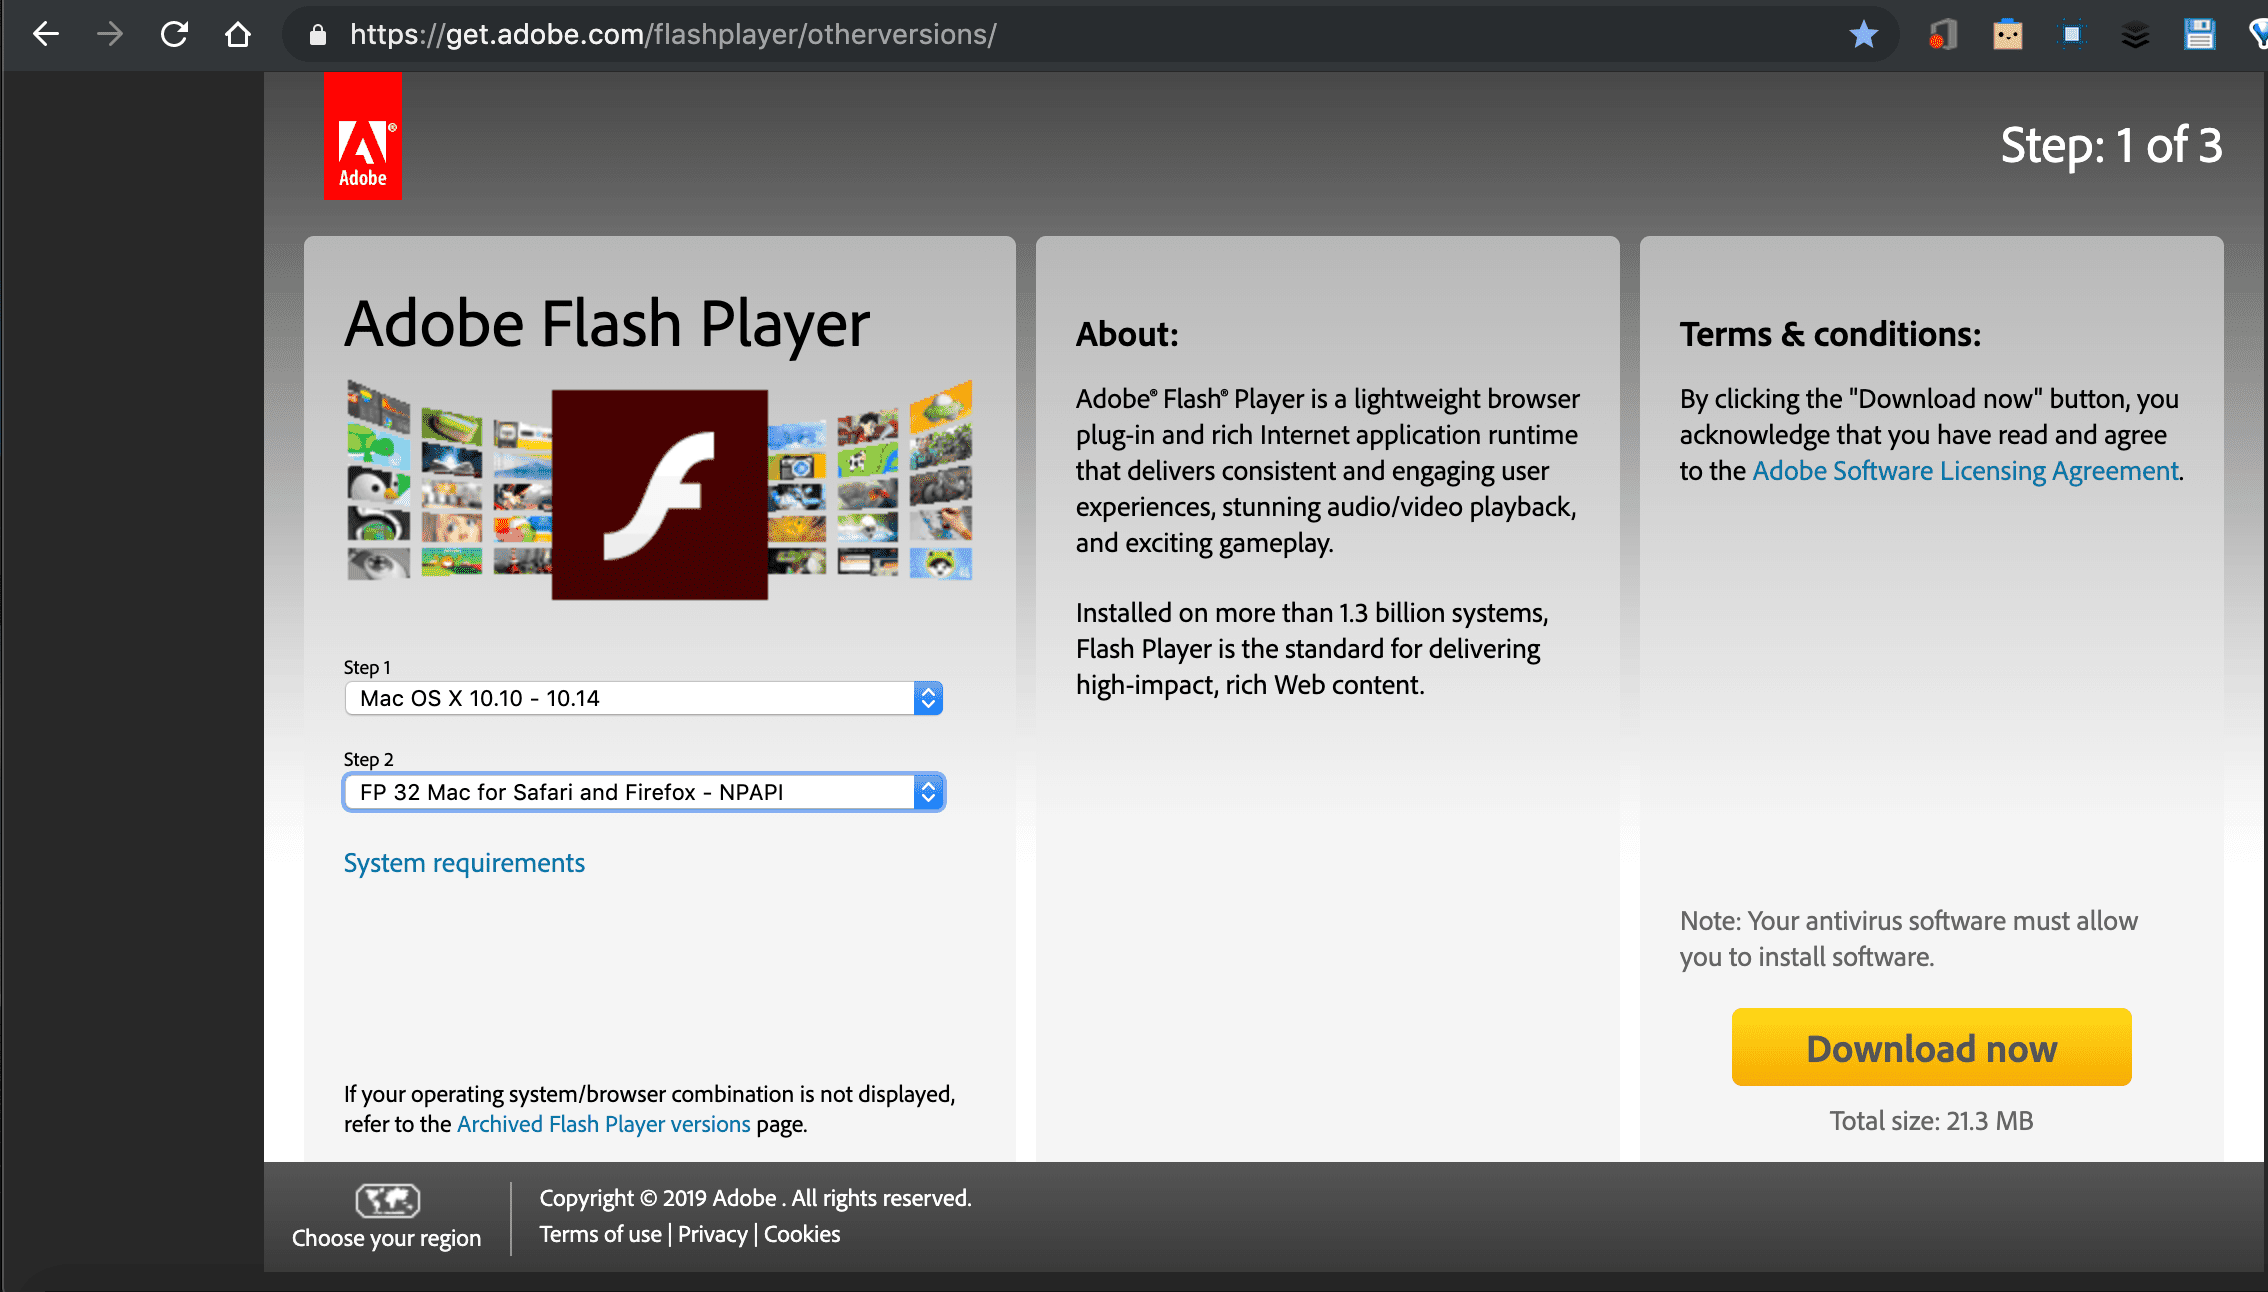 Flash player.dmg file downloaded automatically download